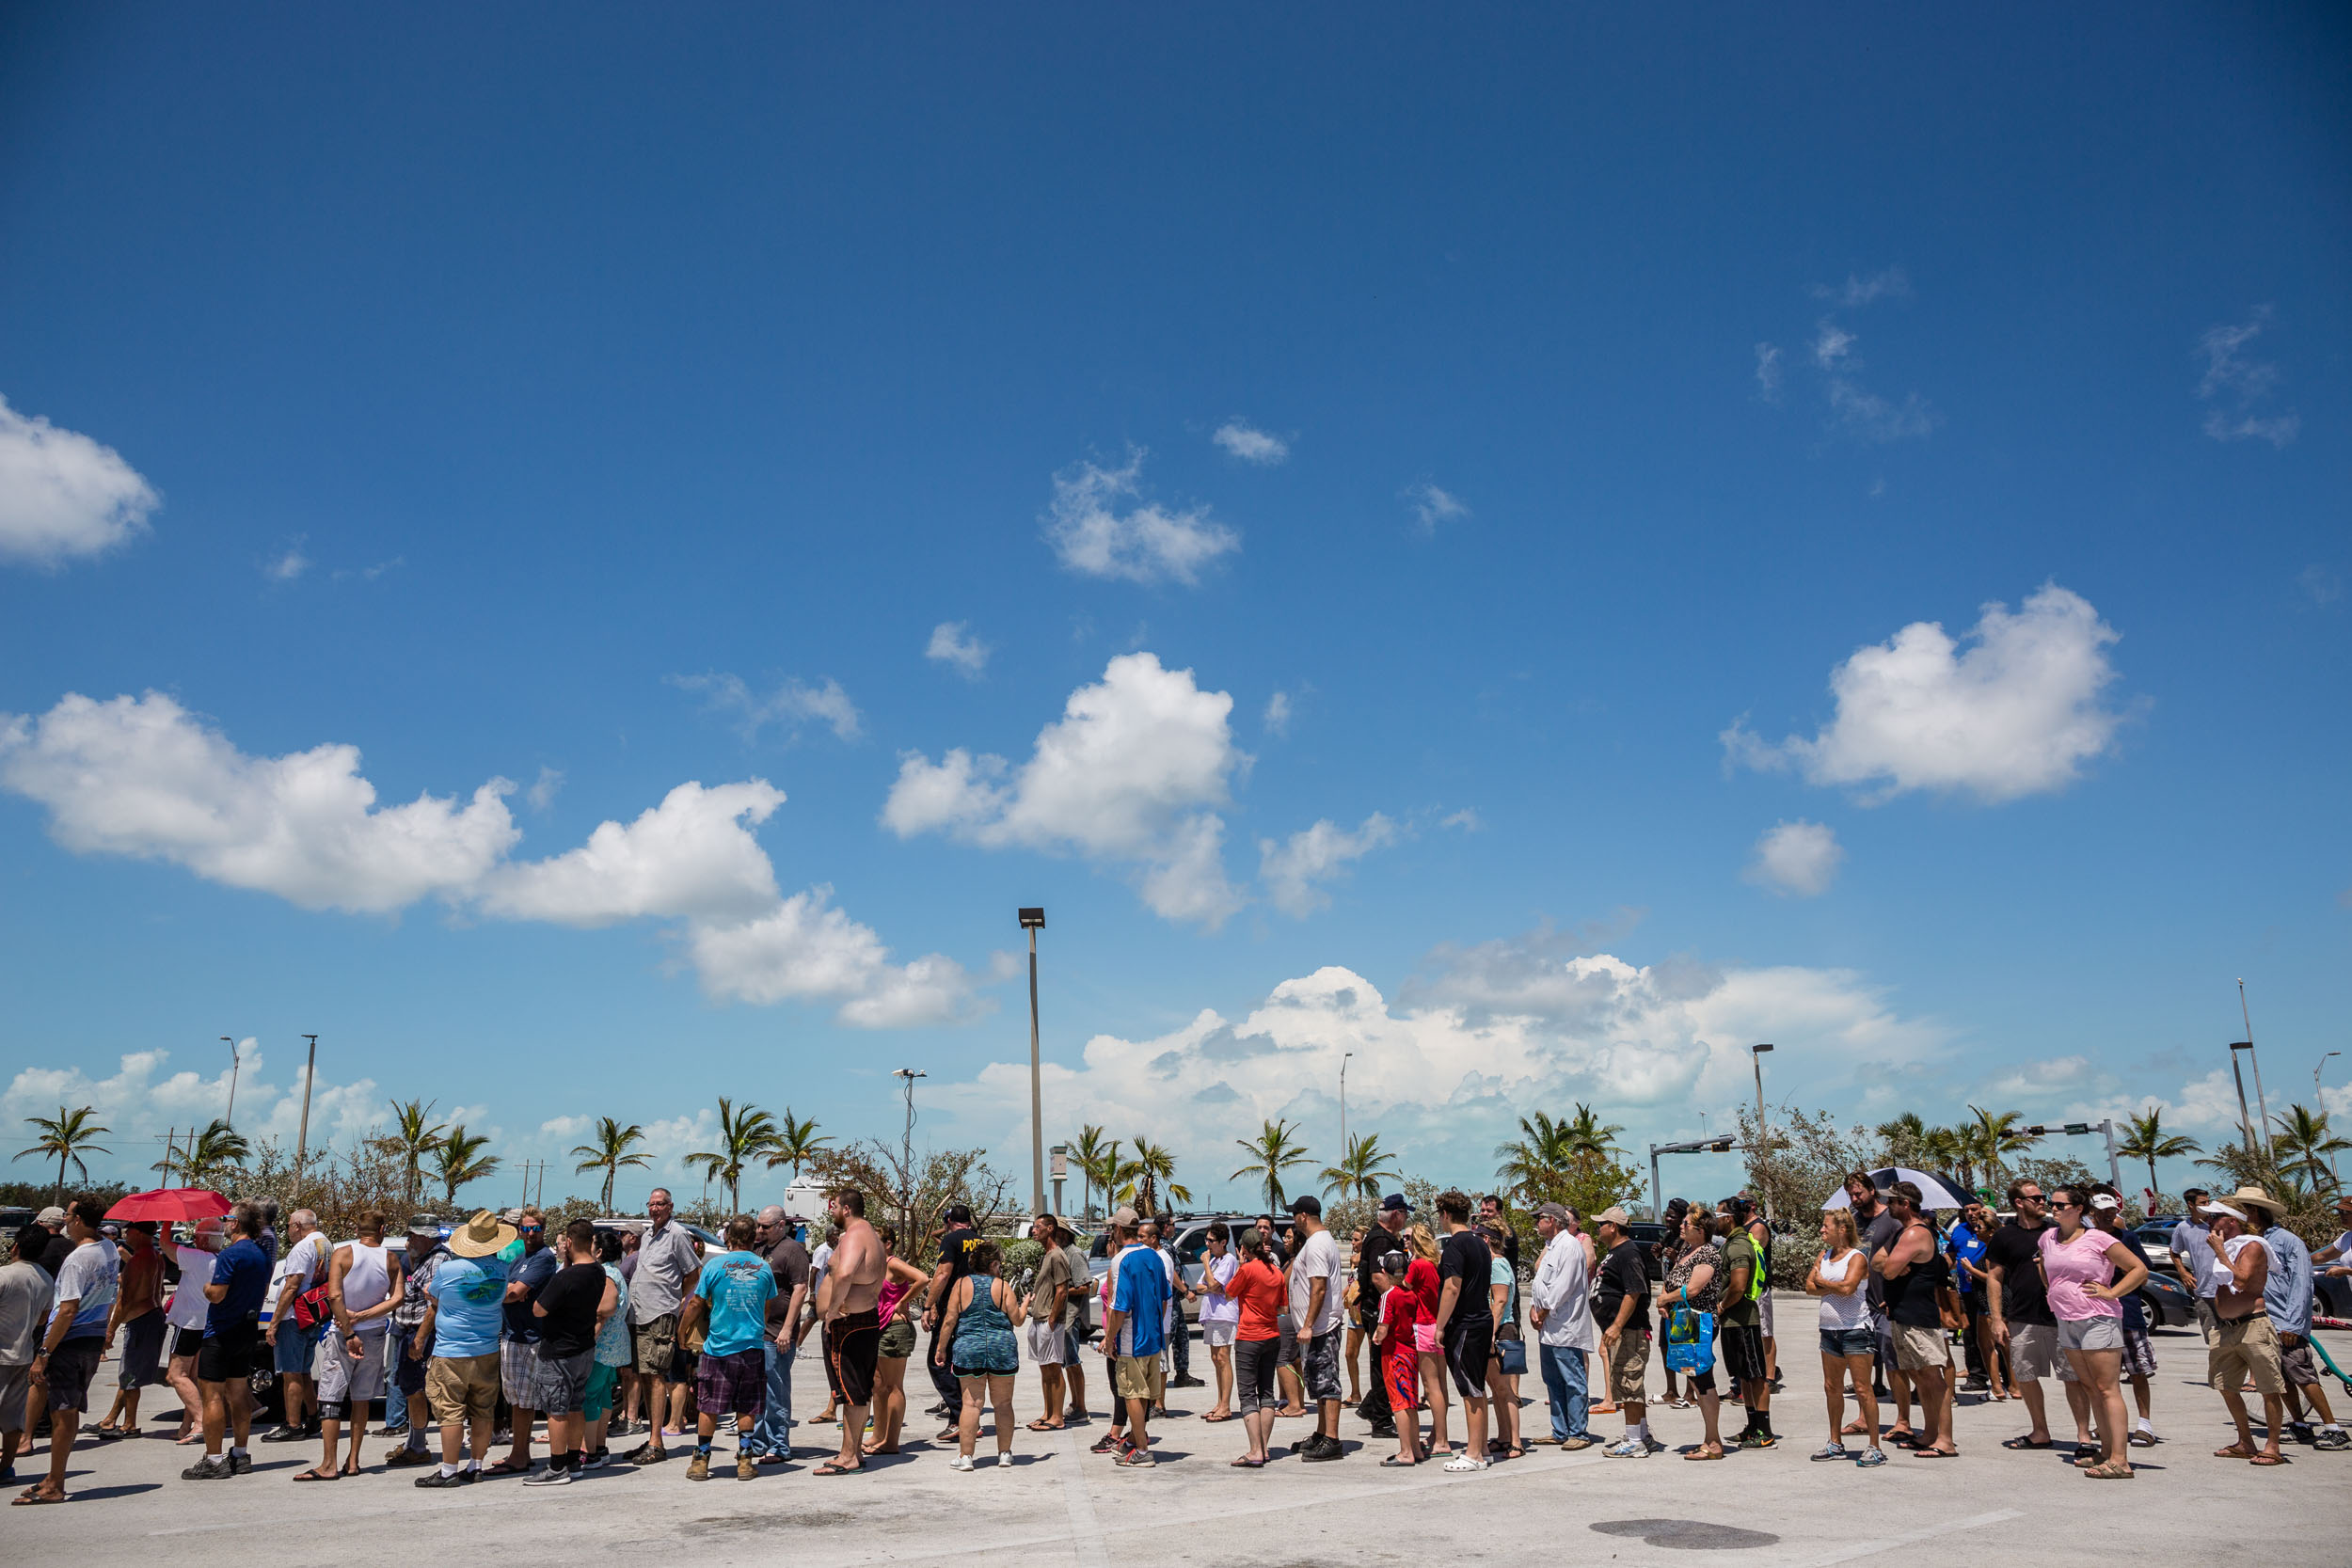 PHOTO: Residents line up for food and water relief supplies in a shopping center parking lot in Key West, Fla., Sept. 13, 2017.